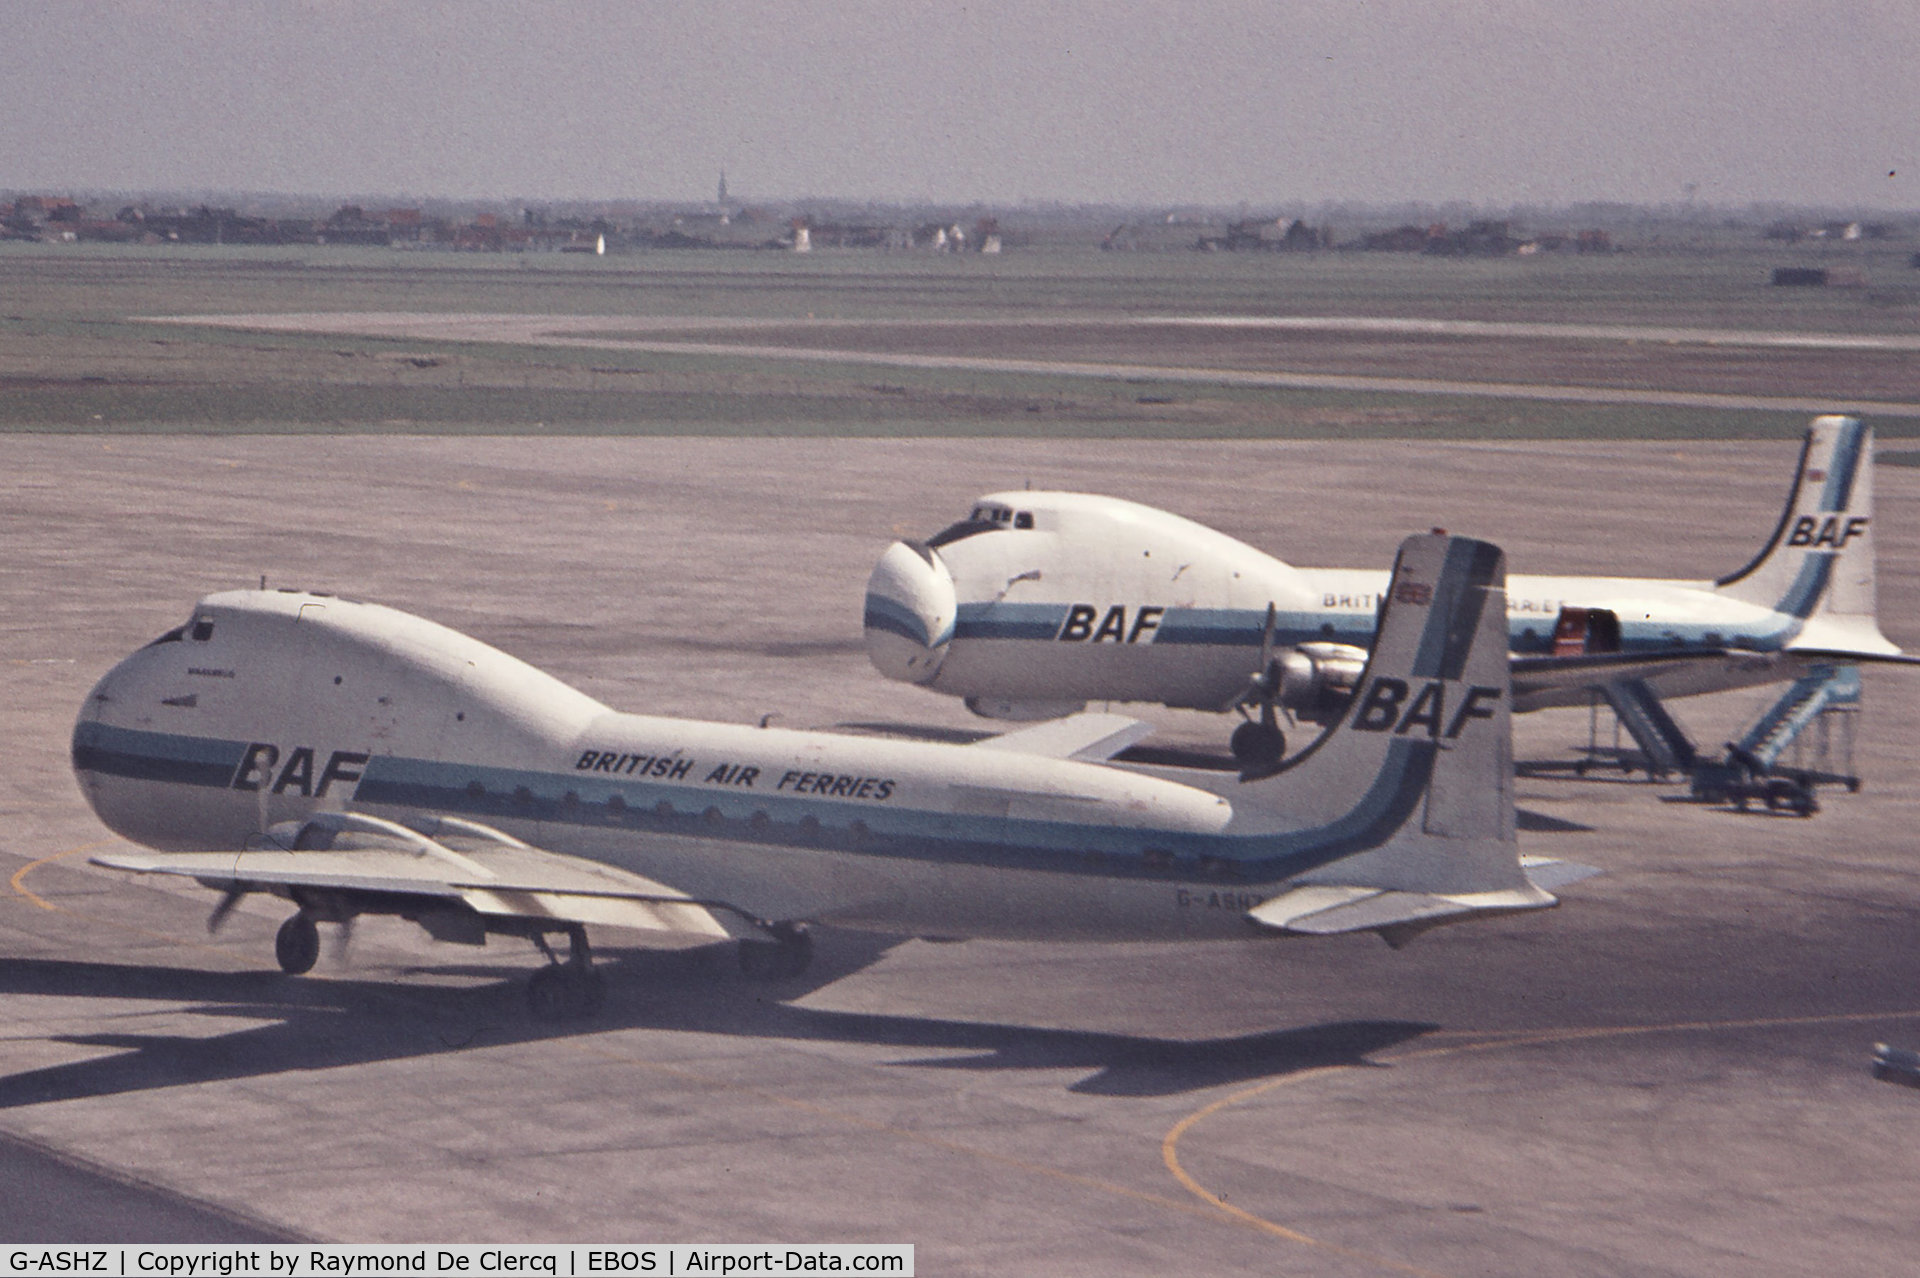 G-ASHZ, 1944 Aviation Traders ATL-98 Carvair (C-54B) C/N 27249, G-ASHZ is leaving the apron while G-AOFW is waiting for loading at Ostend in early 1970's.